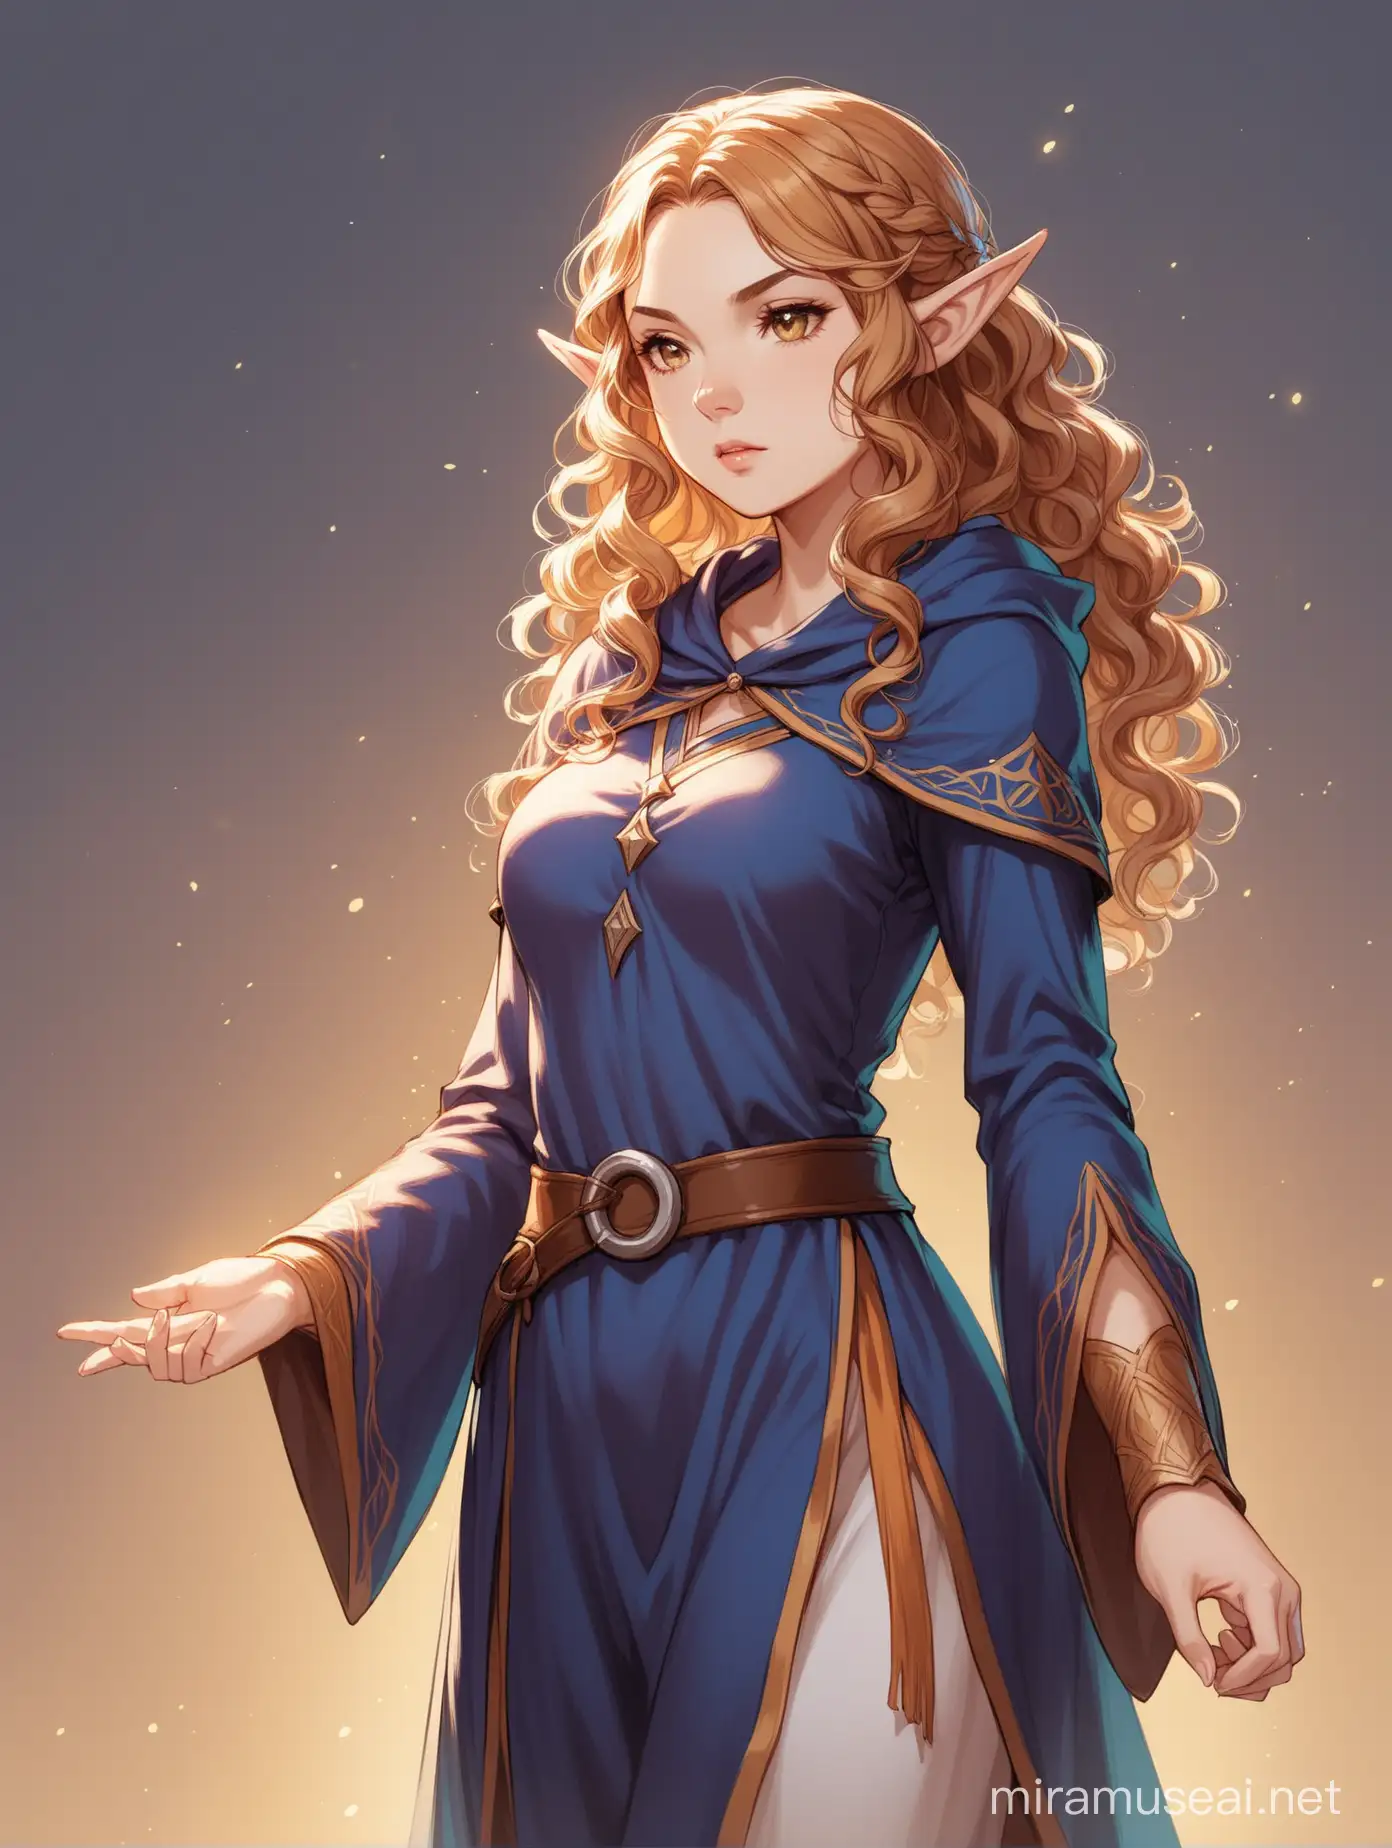 woman, mage outfit, elf, stoic, curly hair, 3 quarter angle
